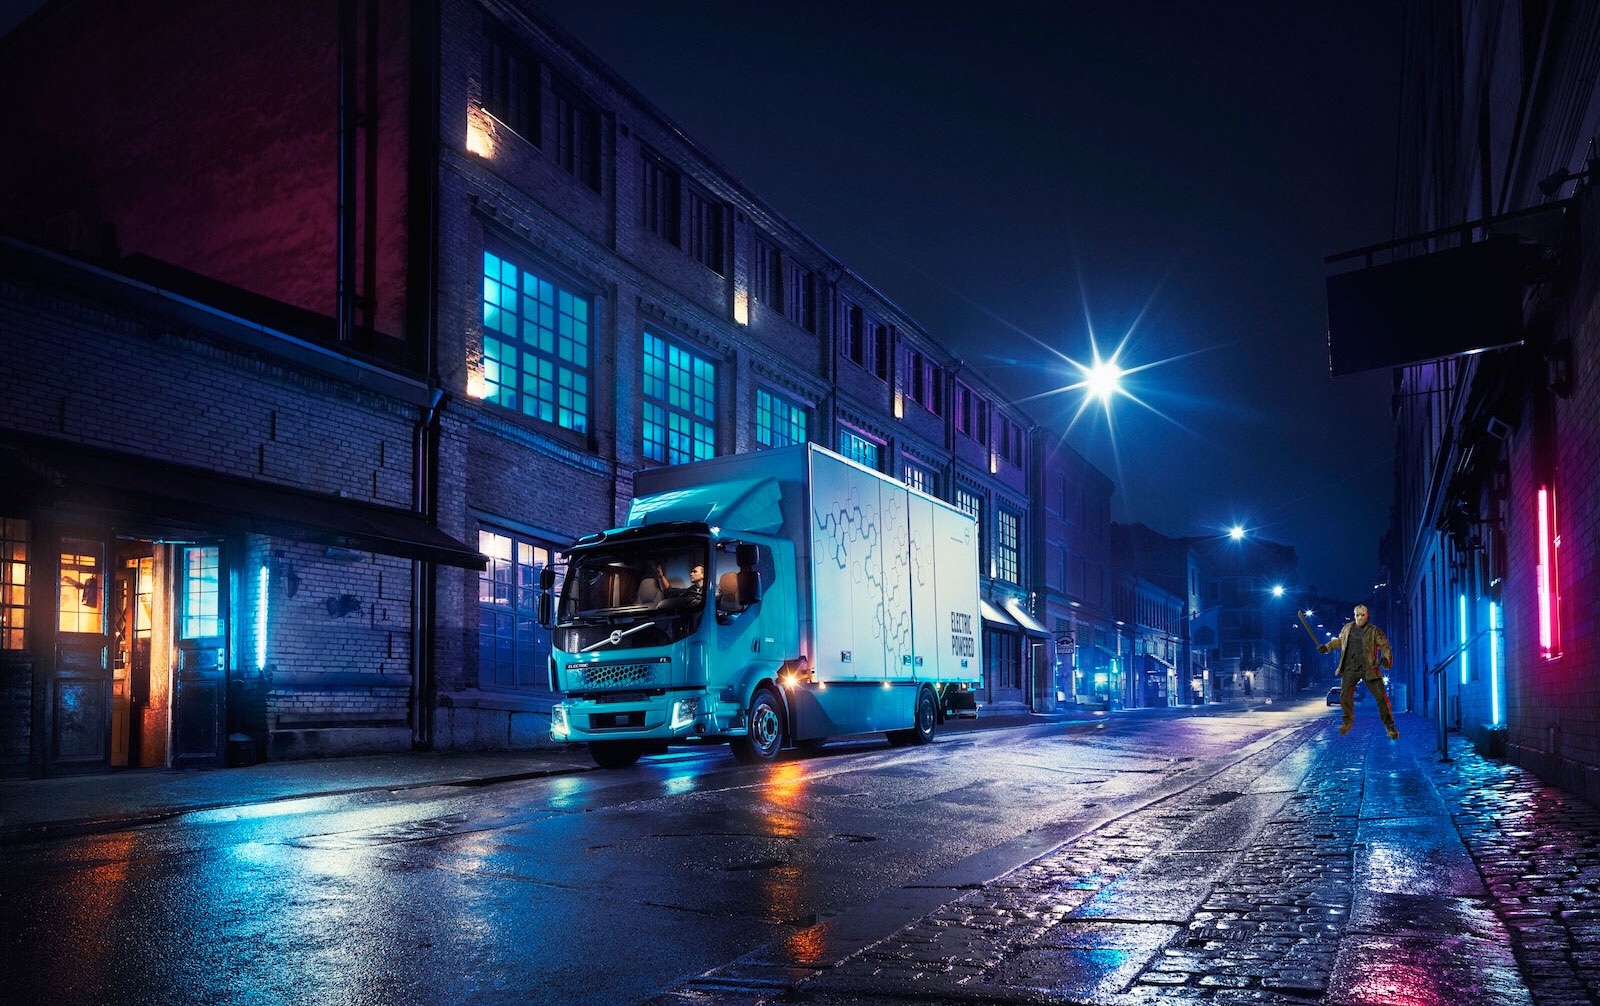 Volvo has introduced an electric truck for commercial use